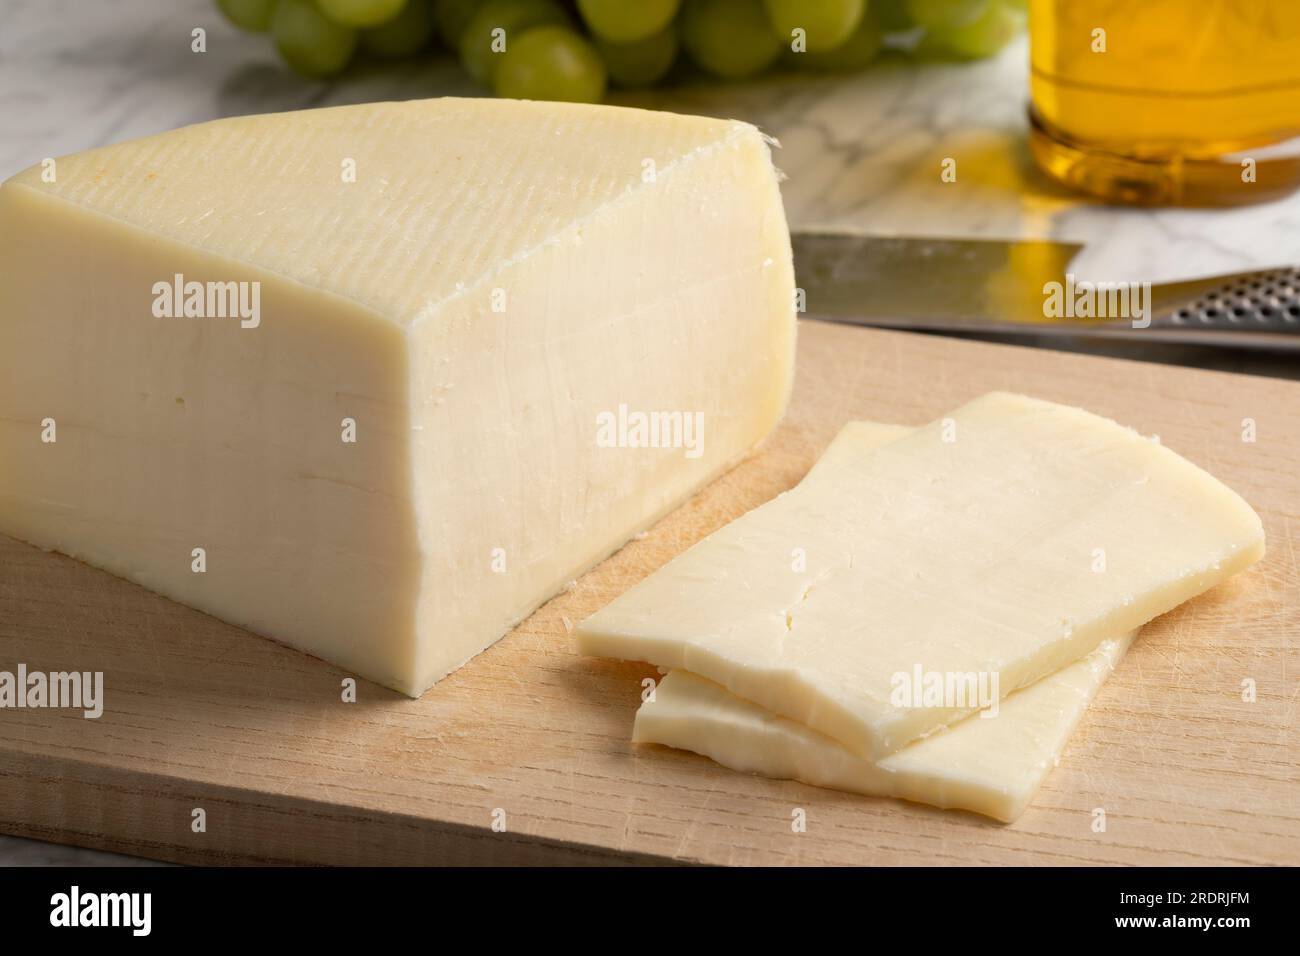 Piece of artisanal semi soft Italian Bel Paese cheese and slices on a cutting board Stock Photo